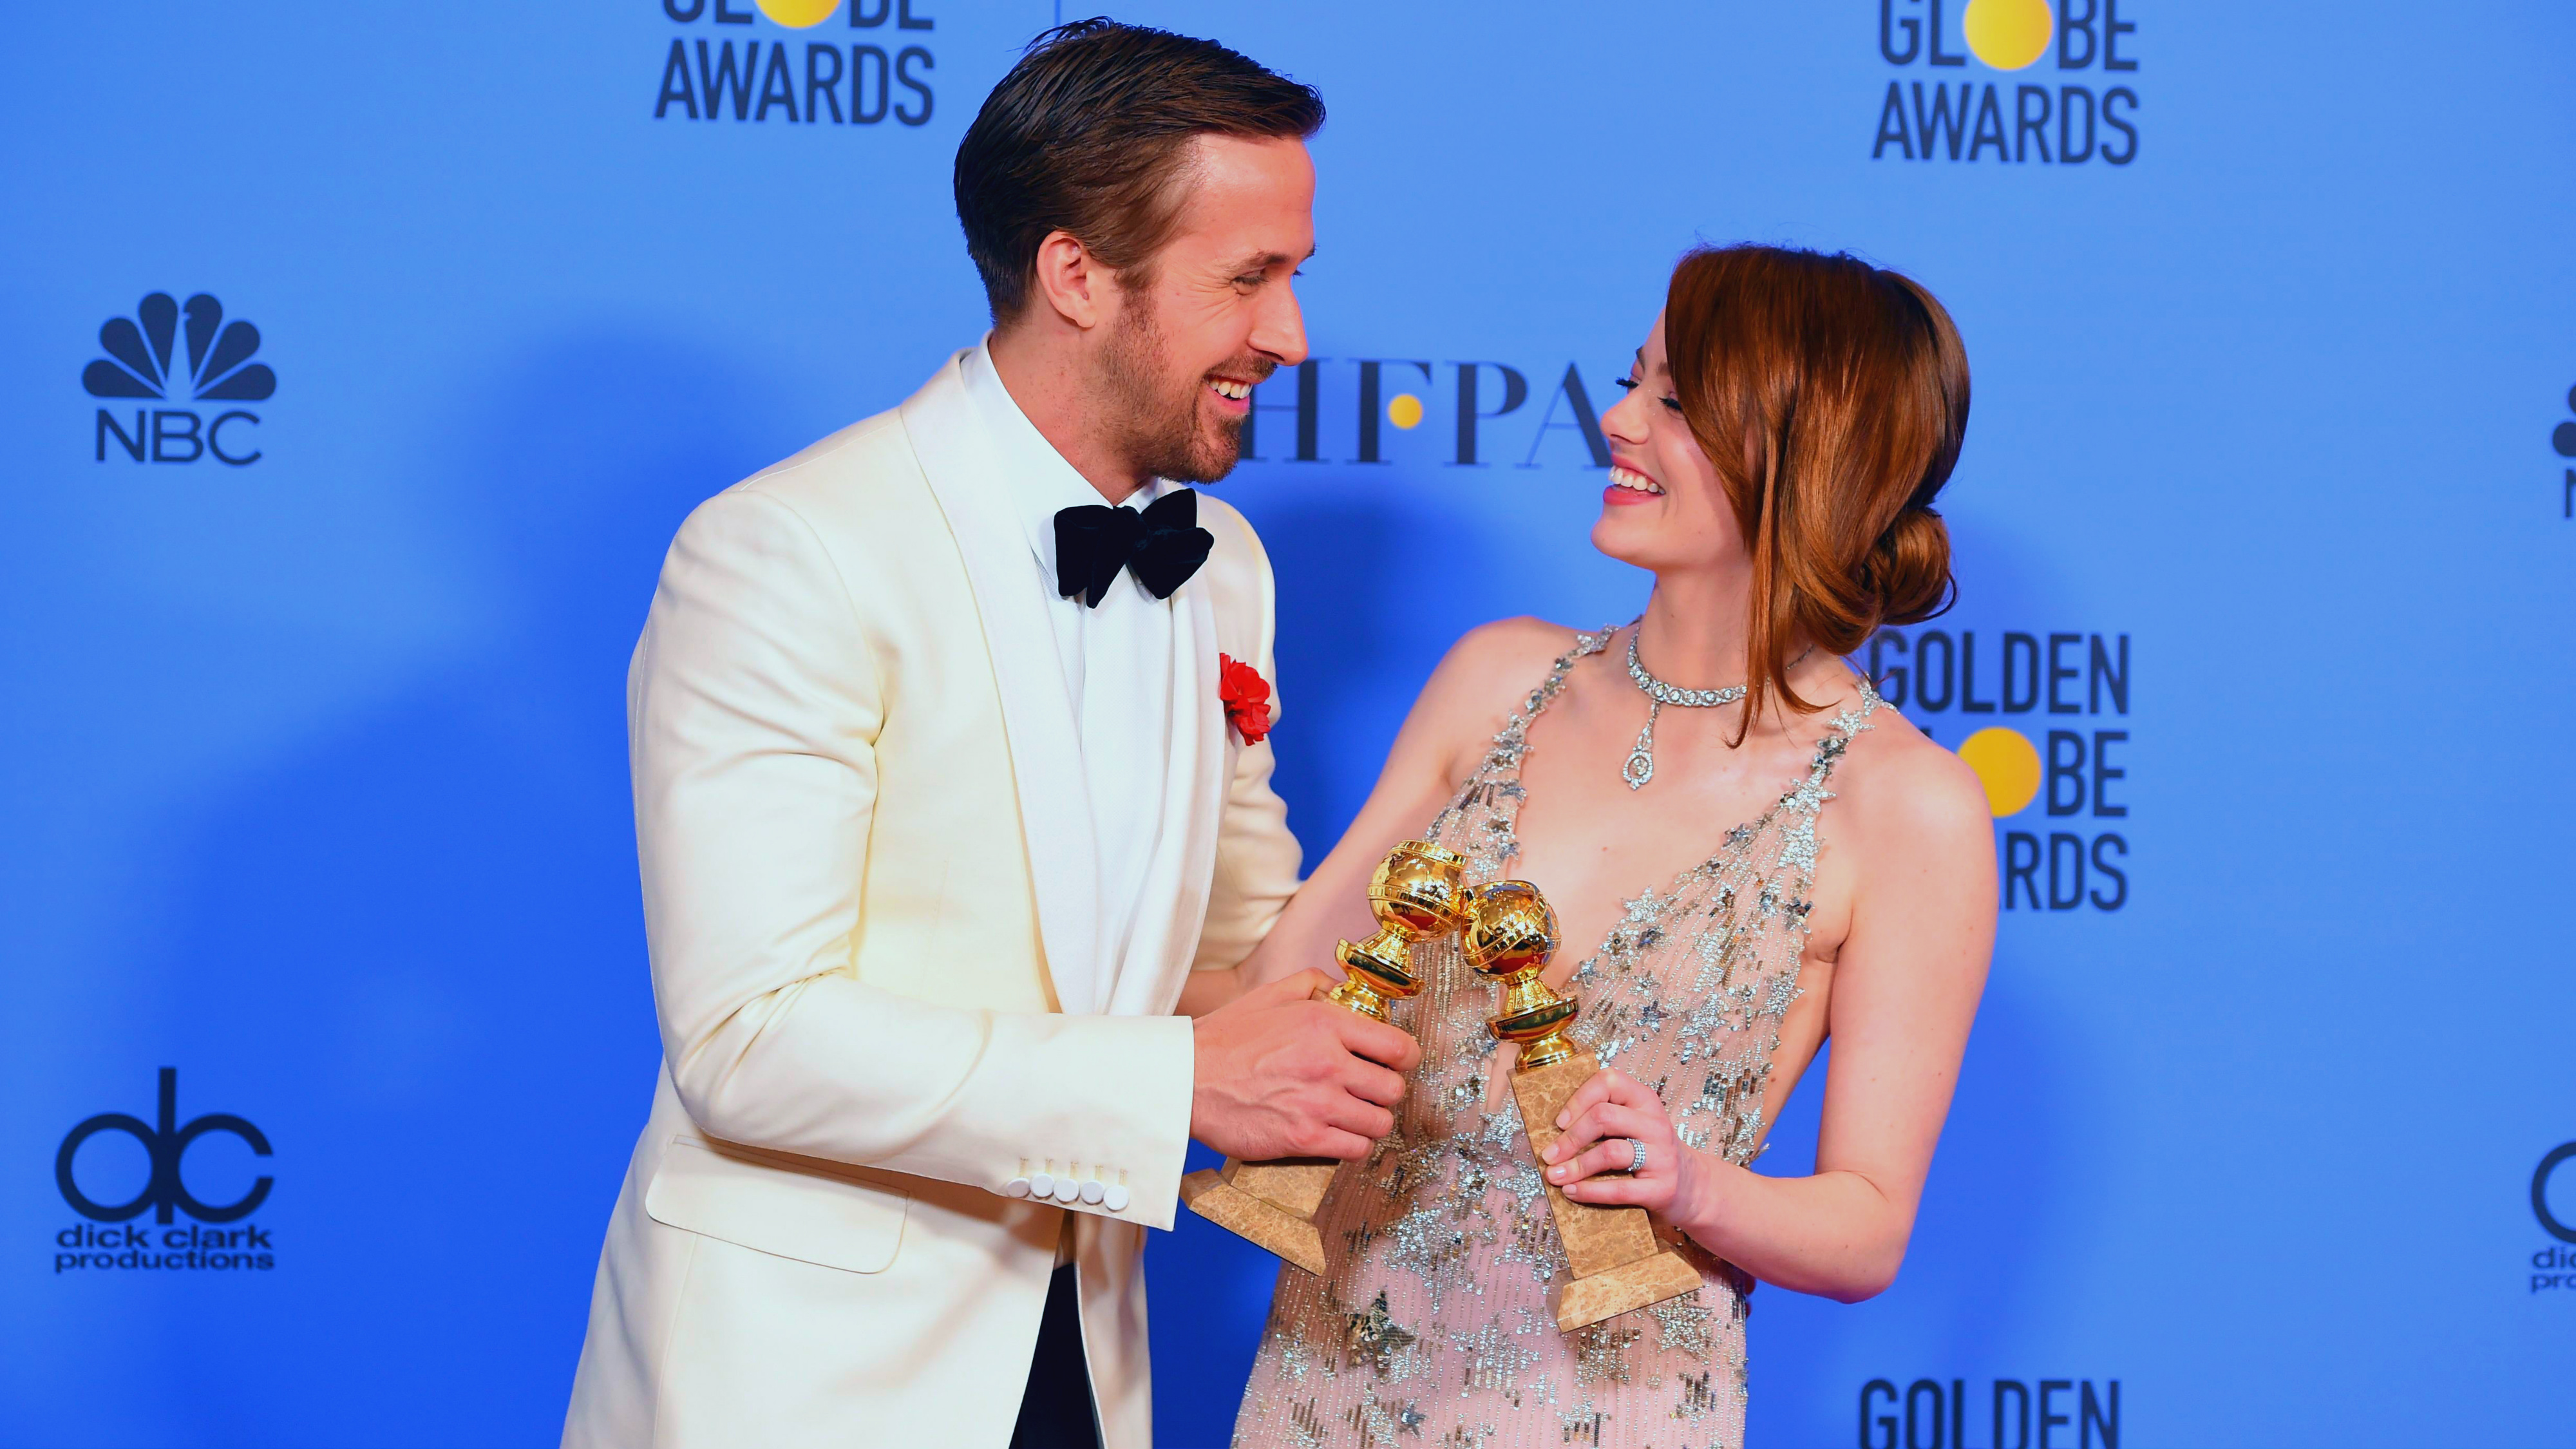 La La Land actors Ryan Gosling and Emma Stone pose with their Golden Globes after the ceremony in Beverly Hills